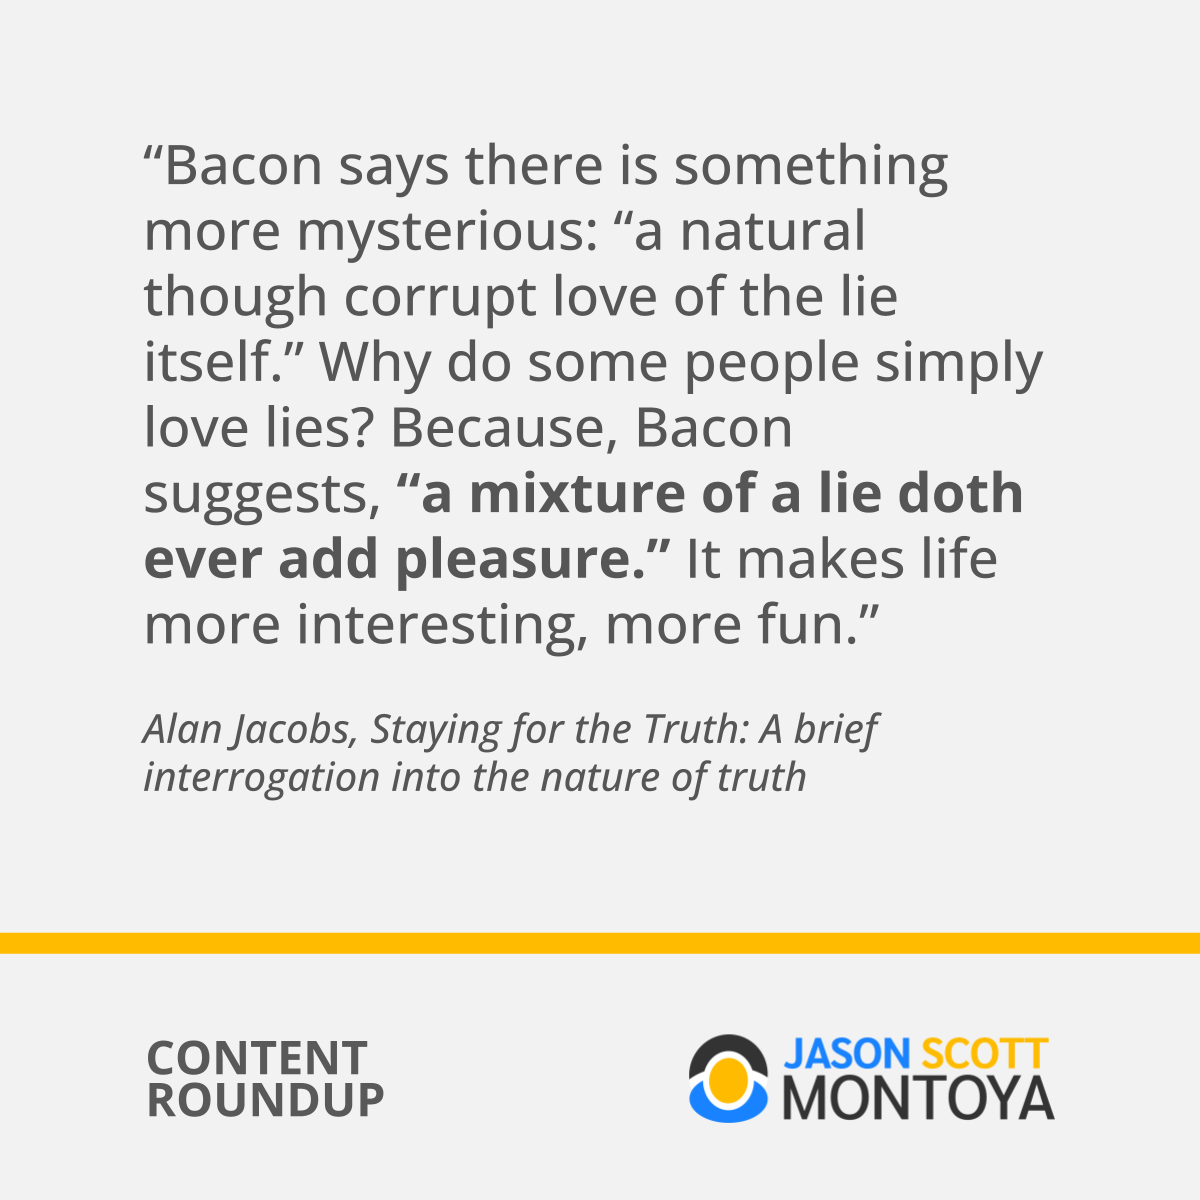 “Bacon says there is something more mysterious: “a natural though corrupt love of the lie itself.” Why do some people simply love lies? Because, Bacon suggests, “a mixture of a lie doth ever add pleasure.” It makes life more interesting, more fun.”  Alan Jacobs, Staying for the Truth: A brief interrogation into the nature of truth